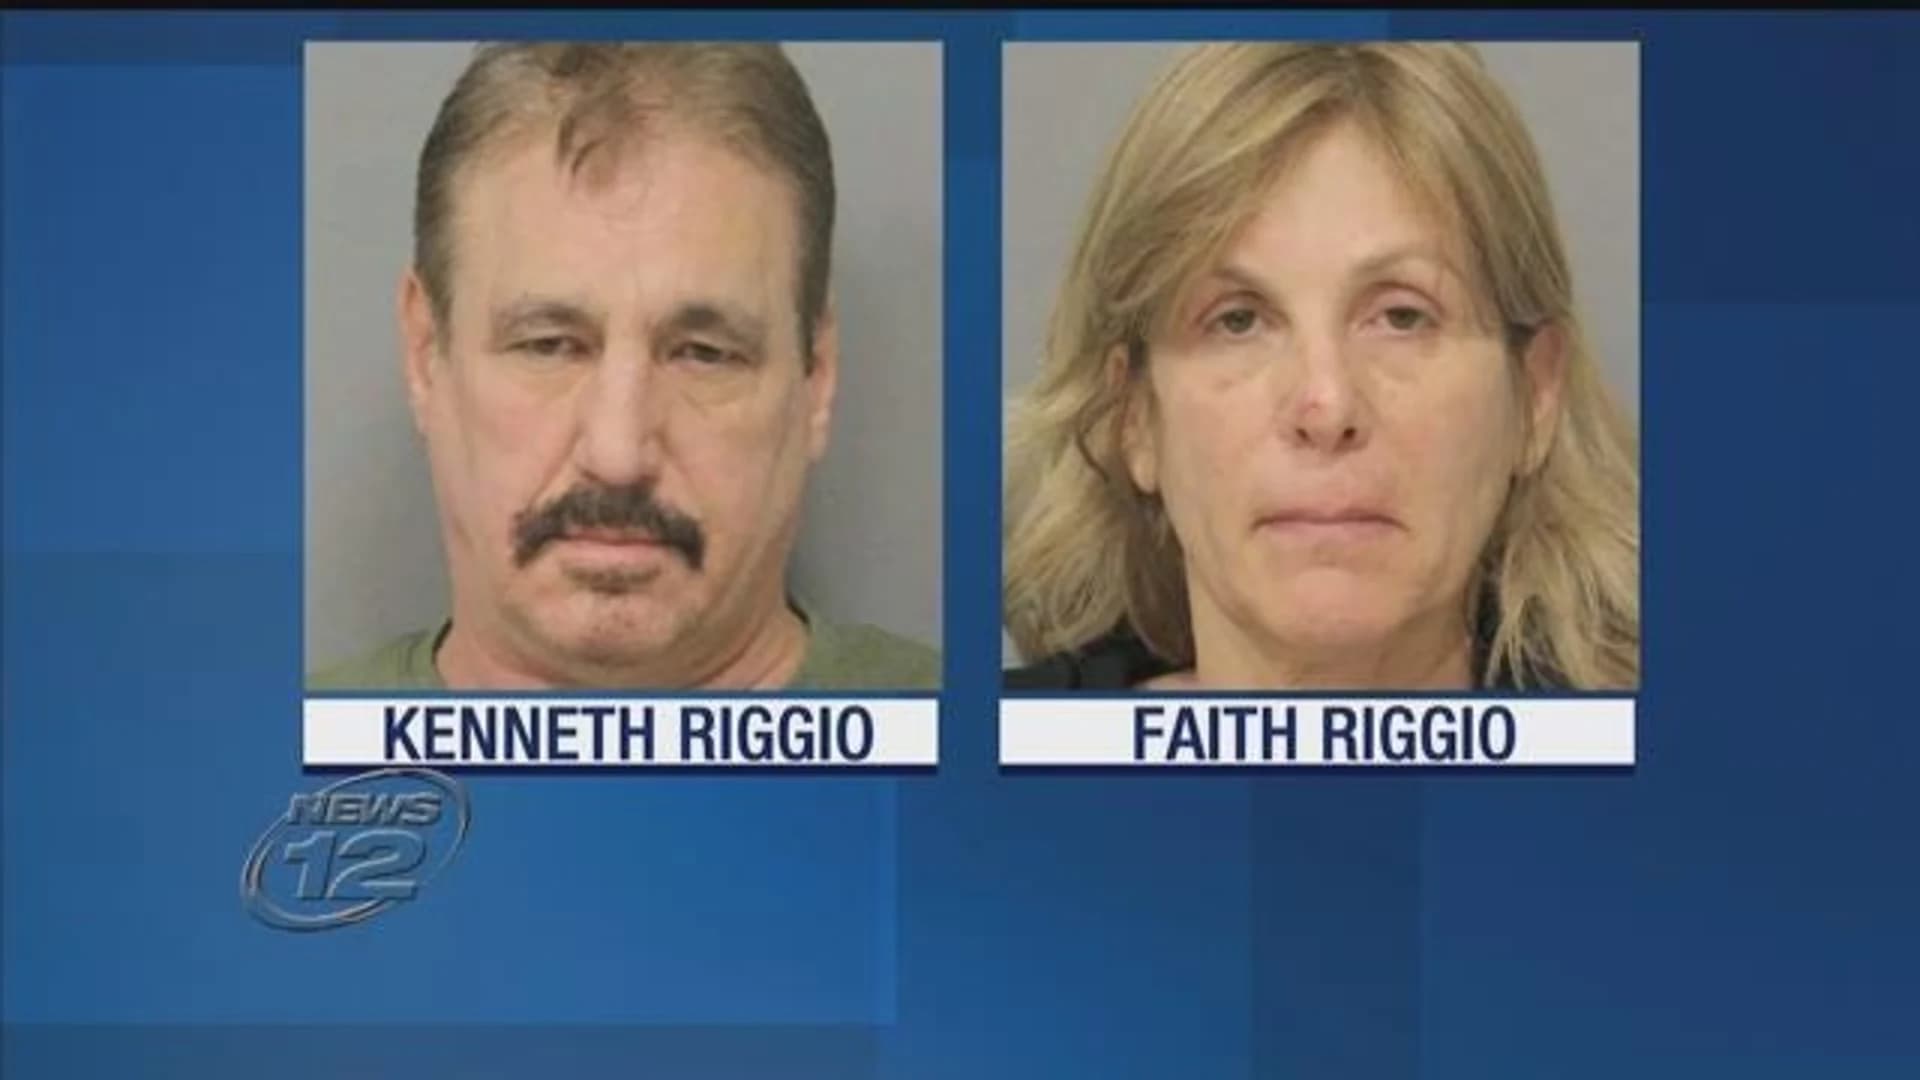 Authorities: Drugs, $150K found in Merrick home of ex-NYPD officer, wife